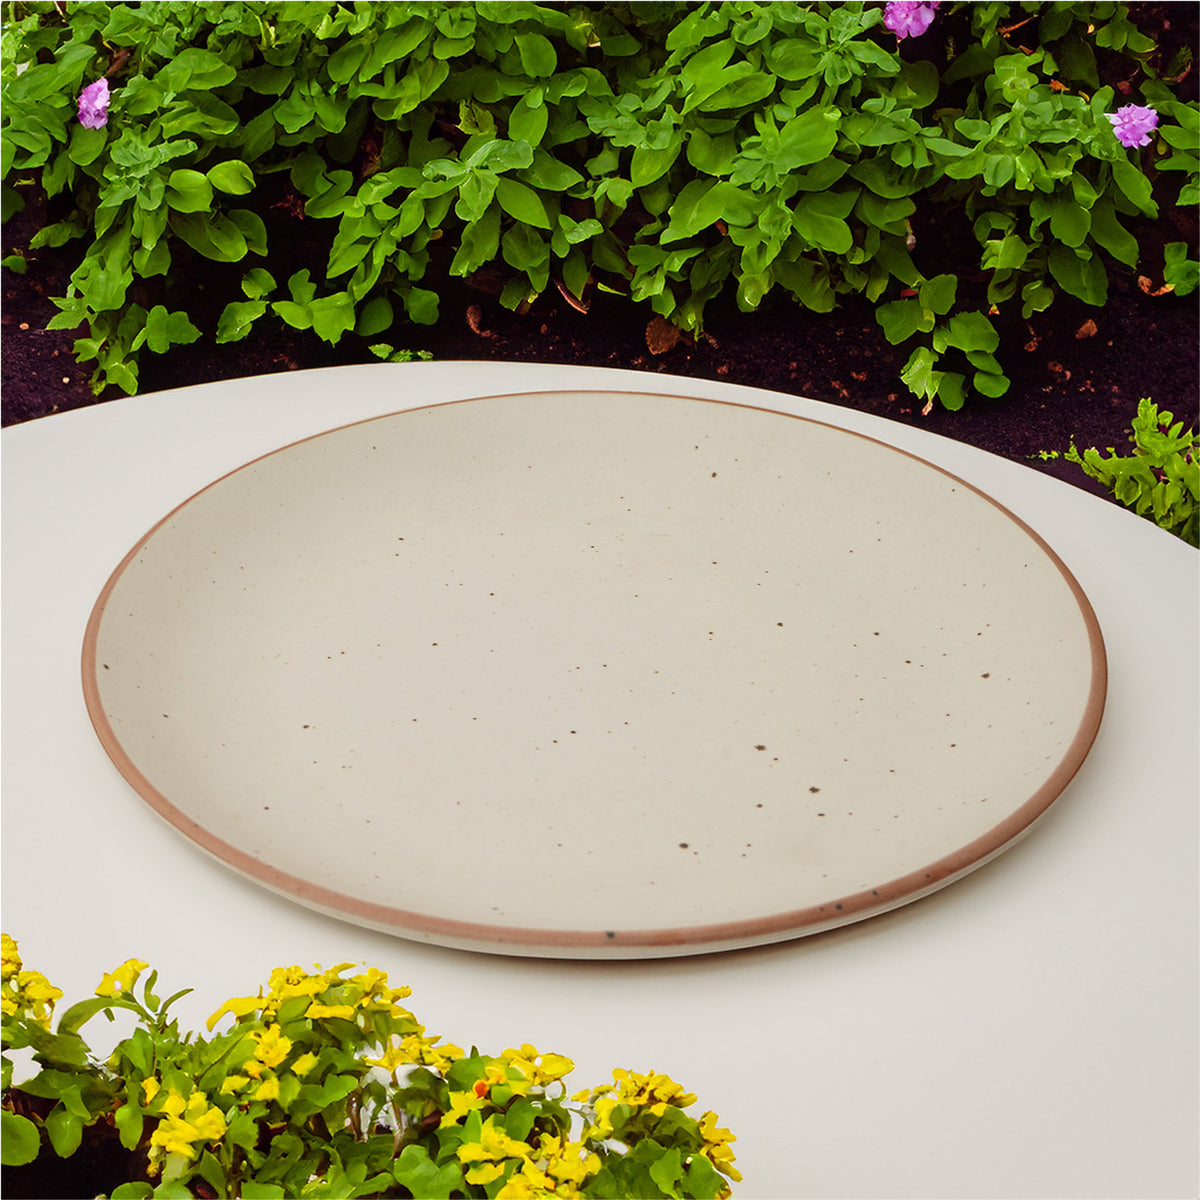 Claymistry Ceramic Quarter Plate Combo | Set of 2 | Biege with brown dots and borders | Ceramic Combos | Dinner Plates | Crockery | Dinnerware